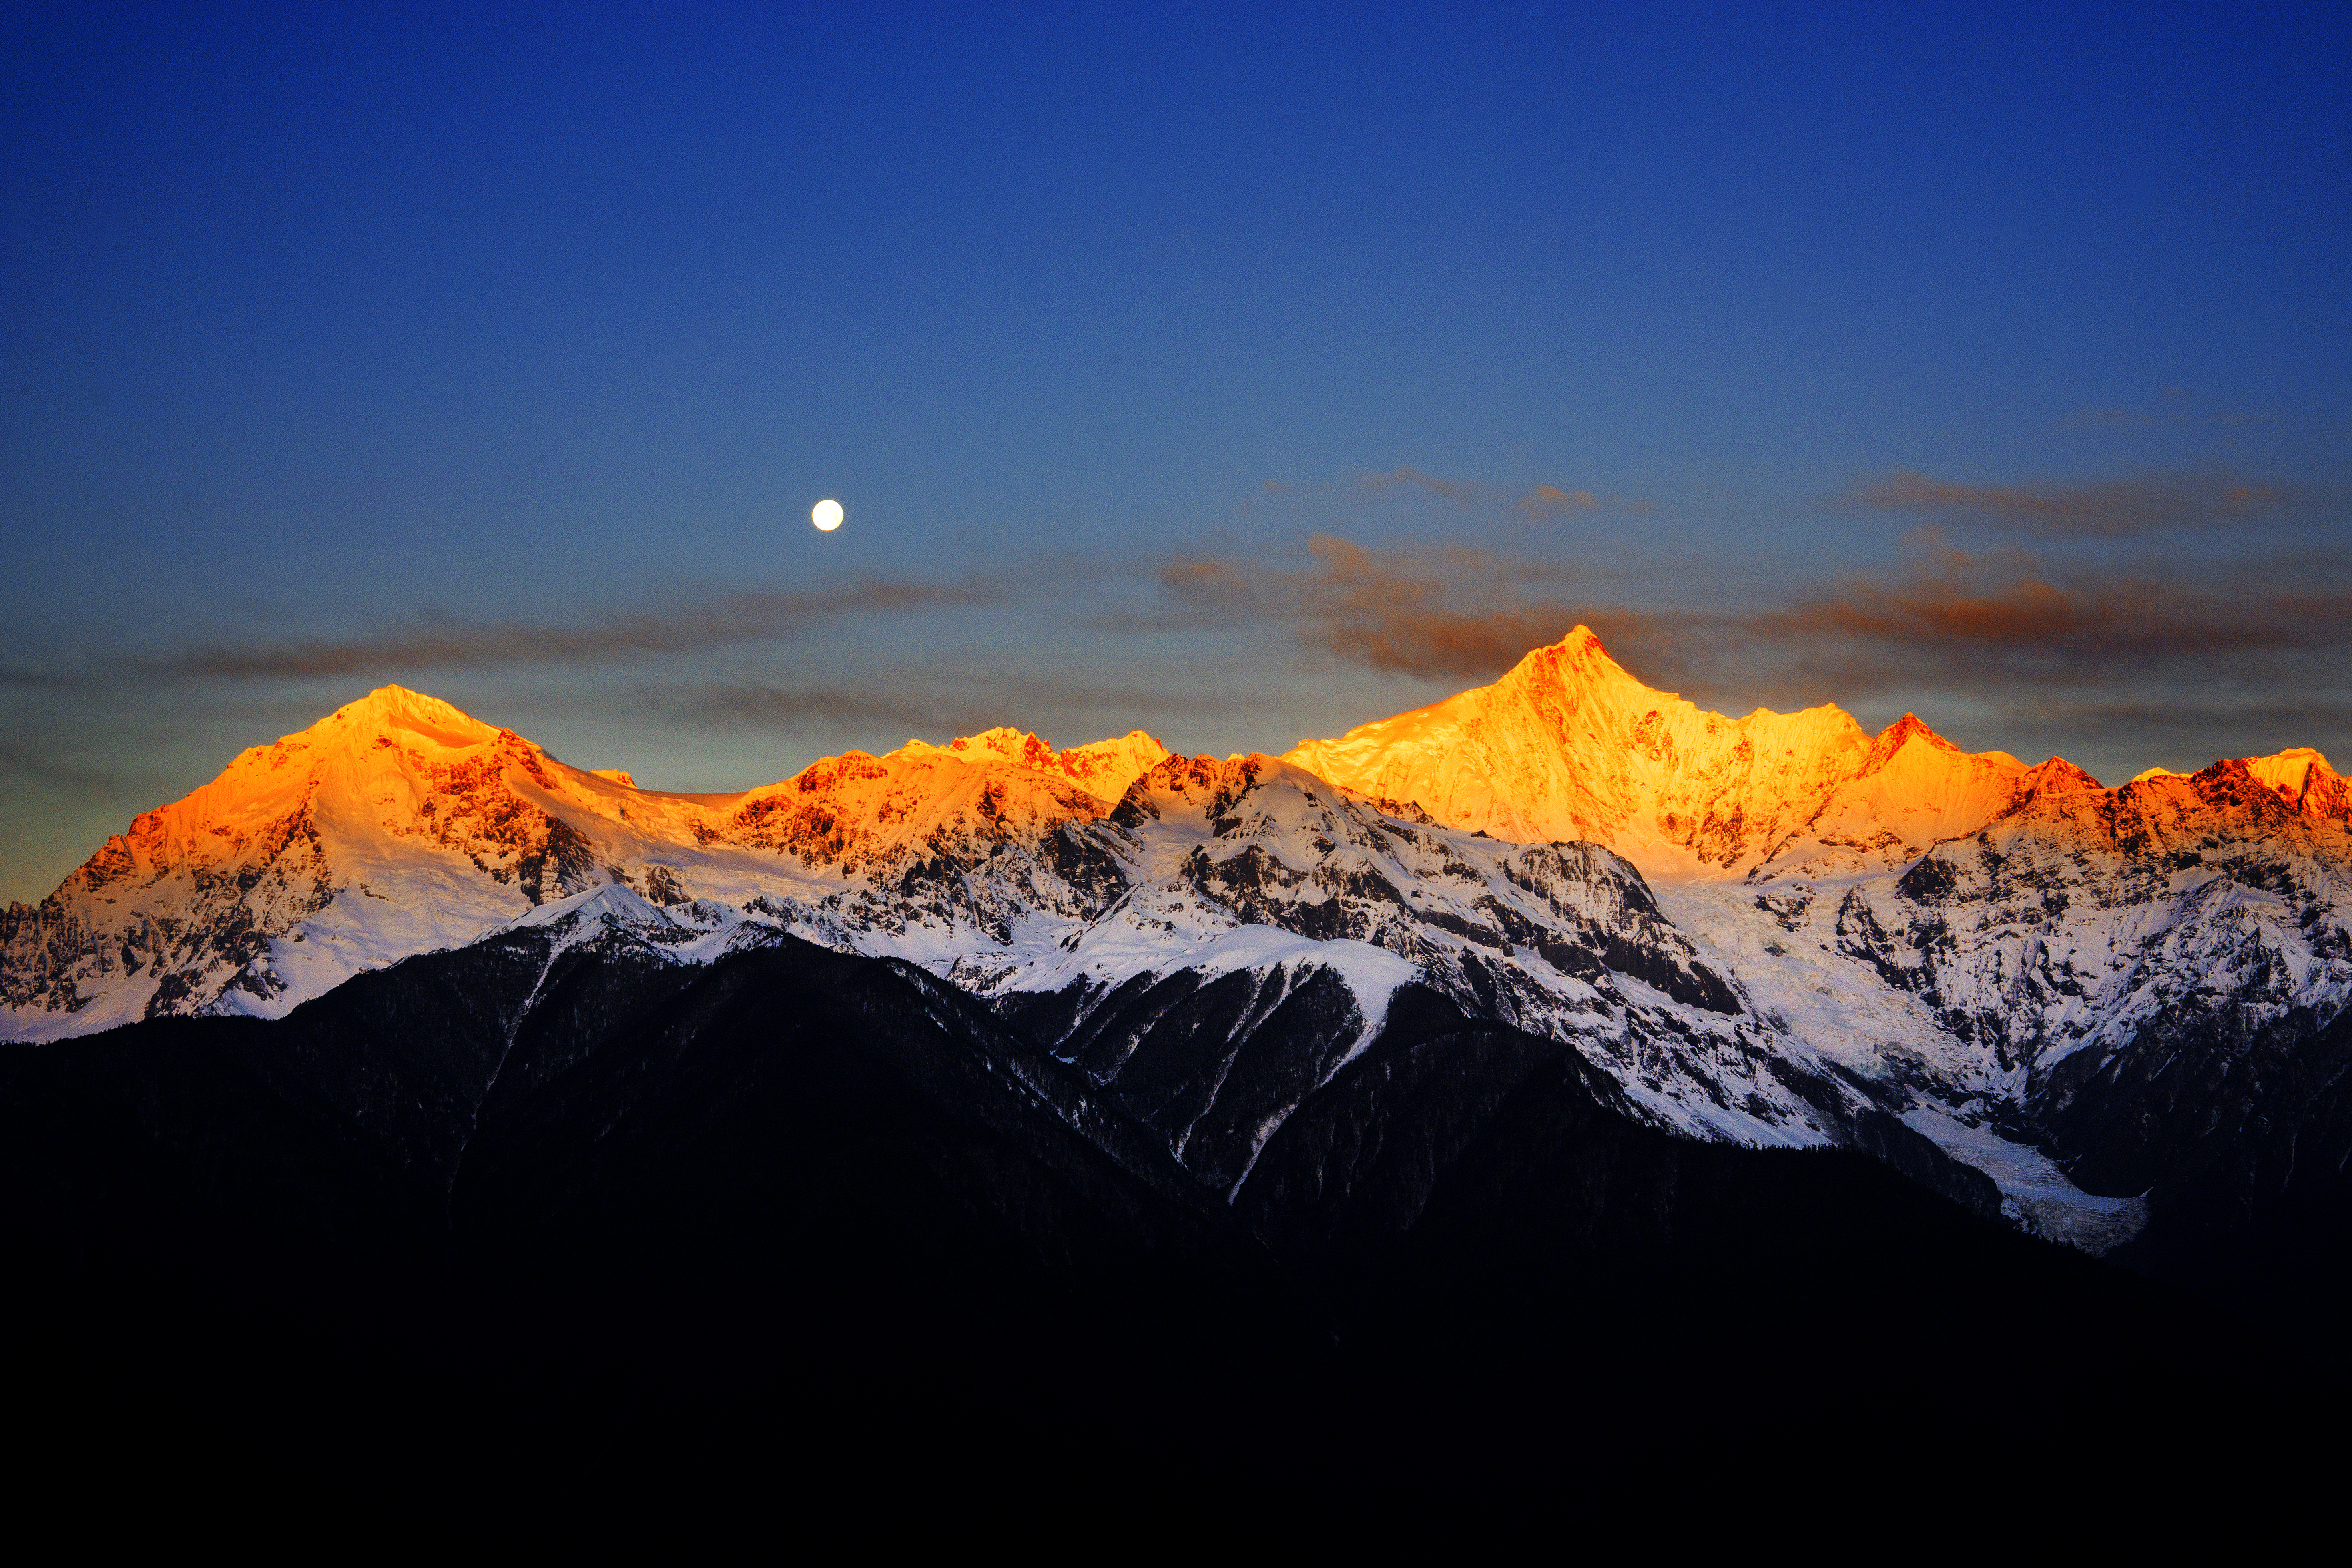 Sunrise touches the peaks of the snow-capped Meili Snow Mountains range in Deqin County, Yunnan Province. /Photo provided to CGTN